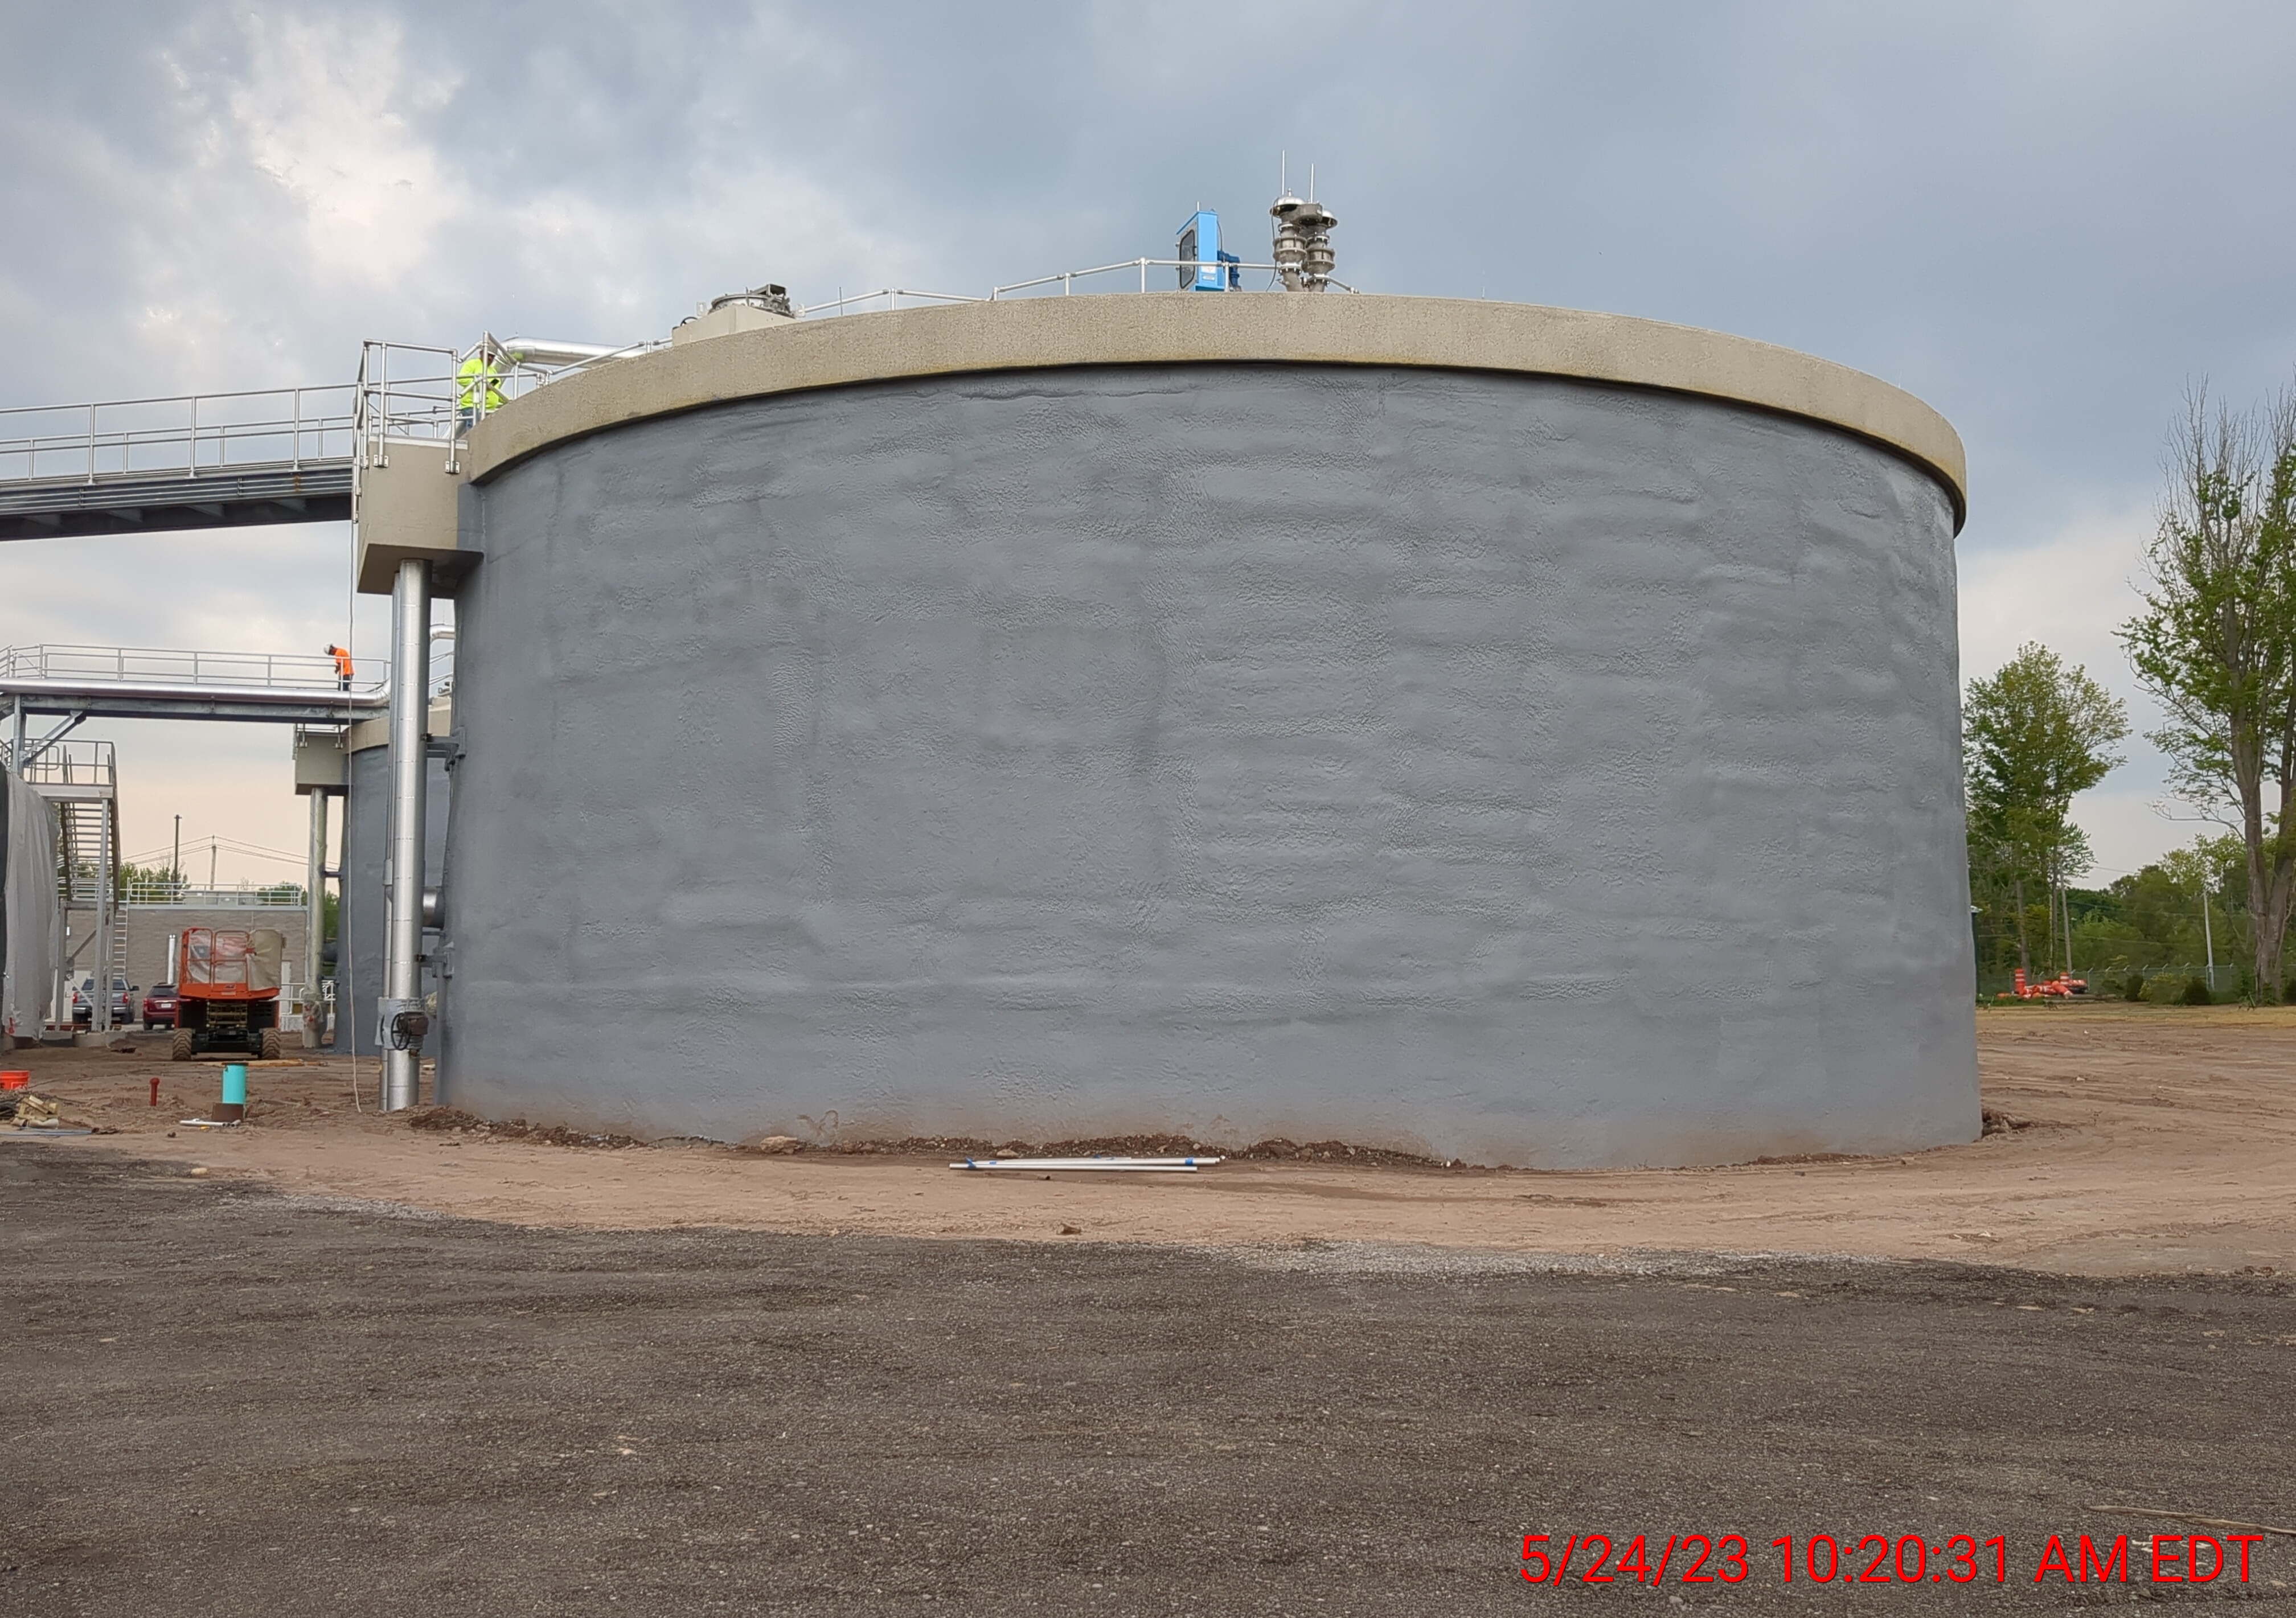 Digester Insulation - May 23